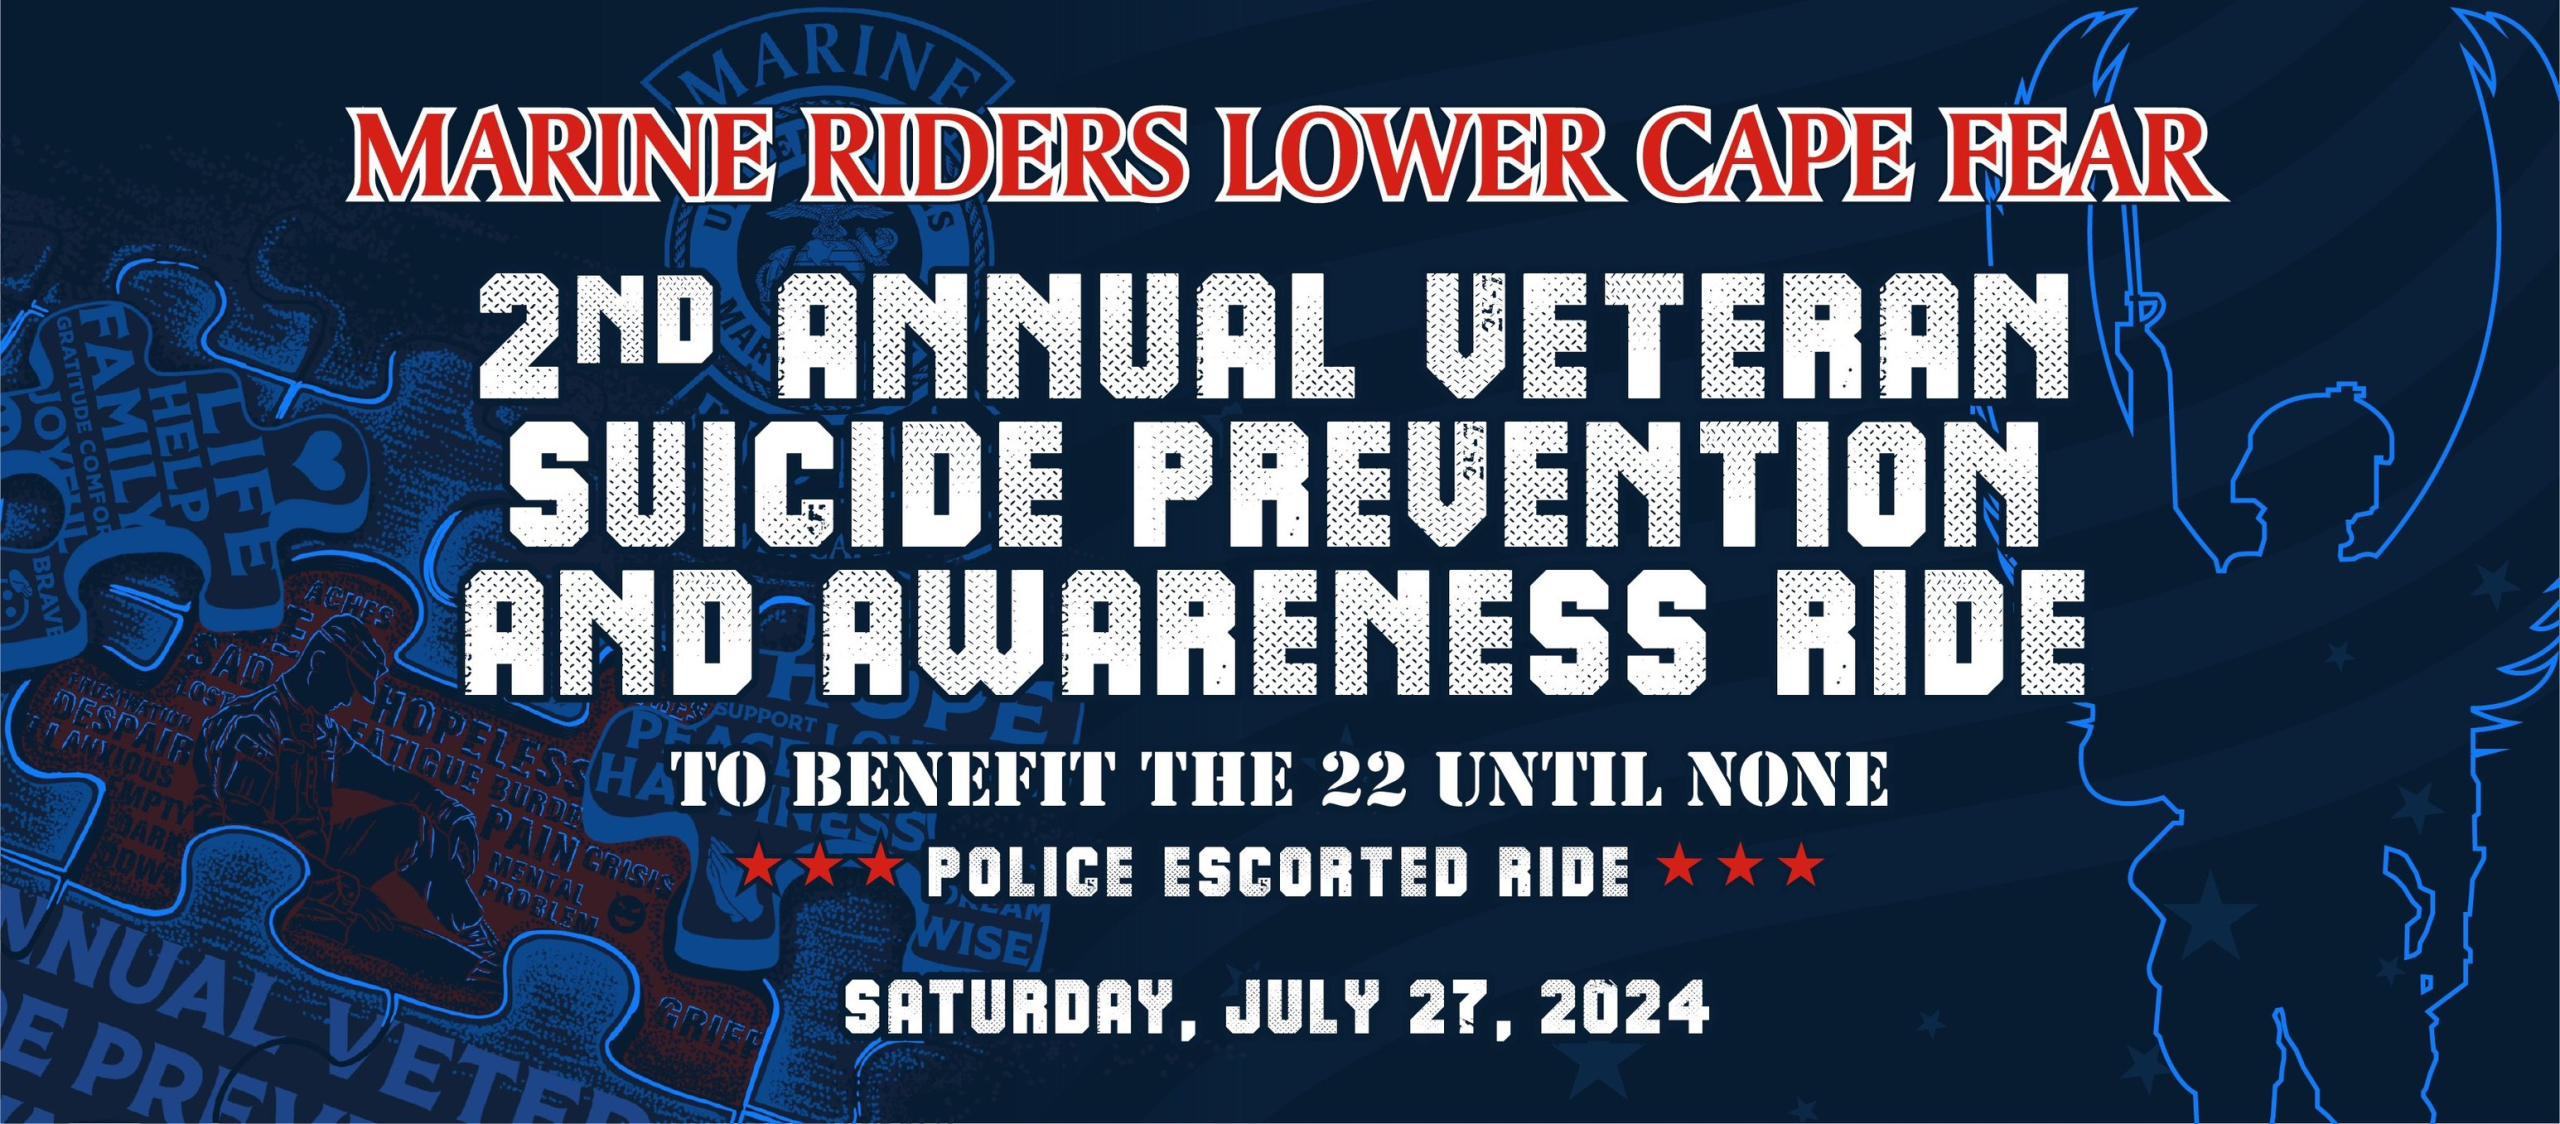 Marine Riders Lower Cape Fear 2nd Annual Suicide Prevention and Awareness Ride